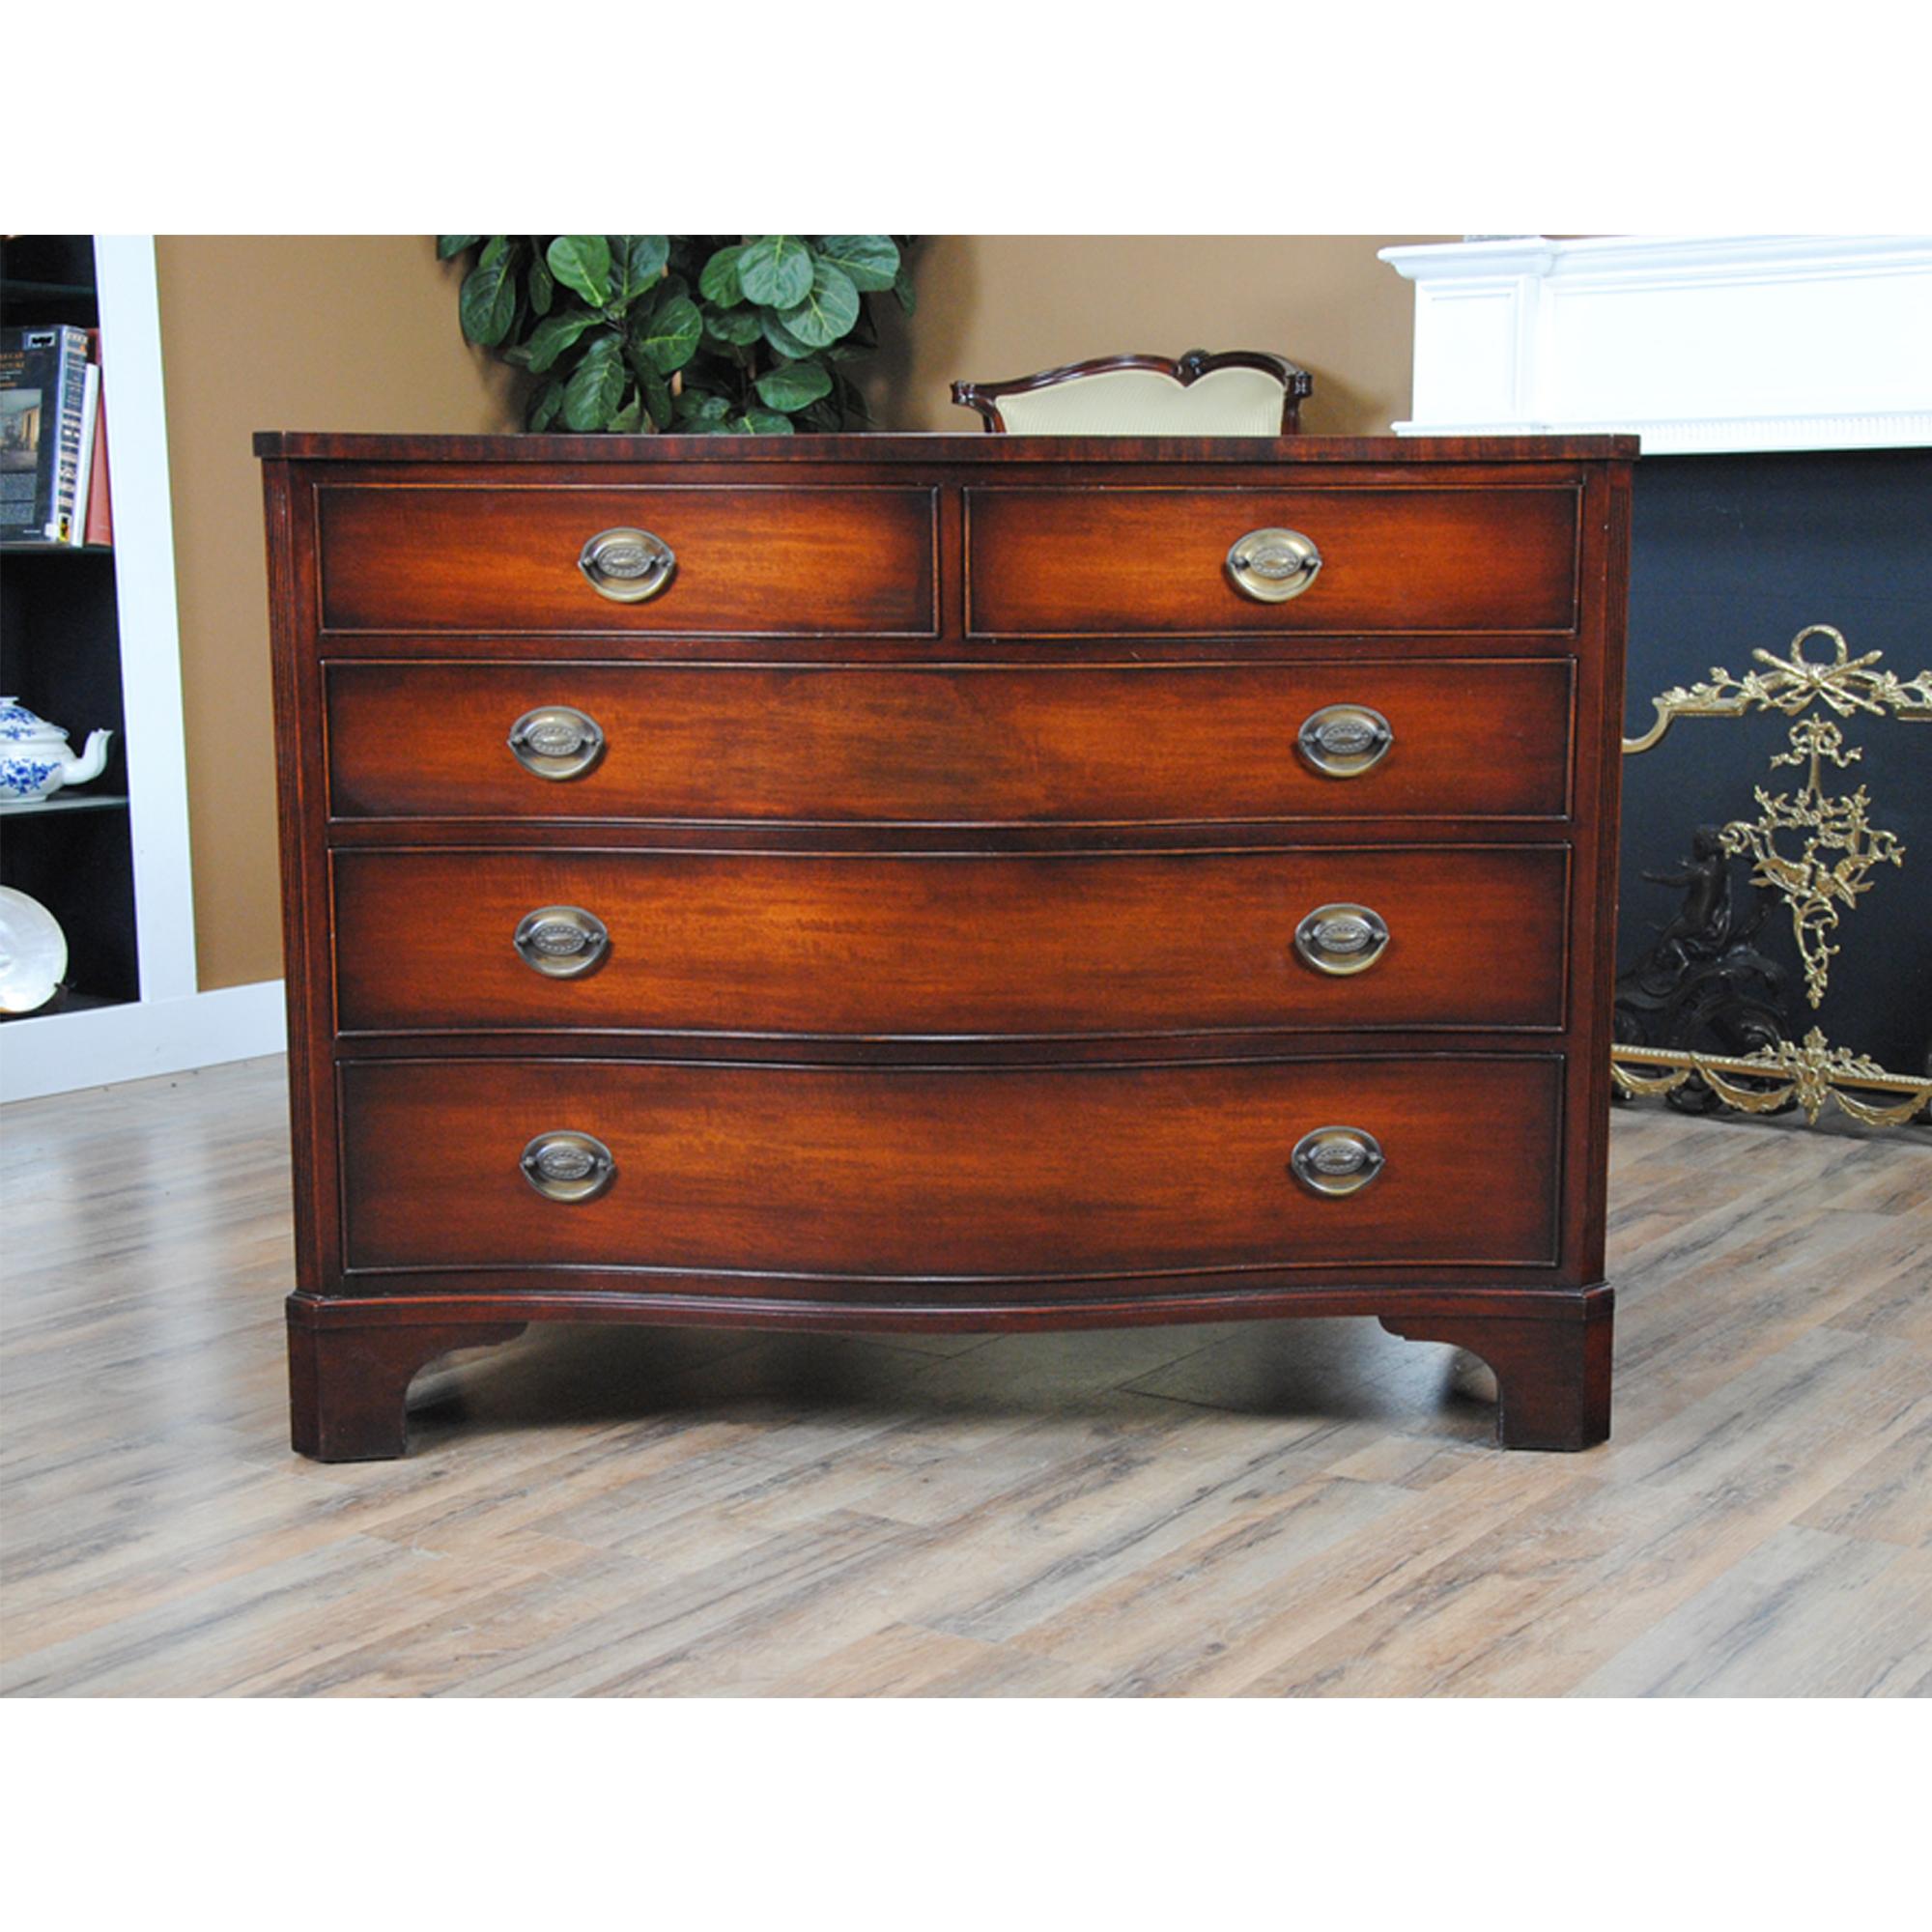 A Kindel Vintage Mahogany Dresser of exceptional scale and quality. A traditionally crafted seprentine front dresser in excellent condition, having recently been restored. From the well developed and canted bracket feet moving up through the